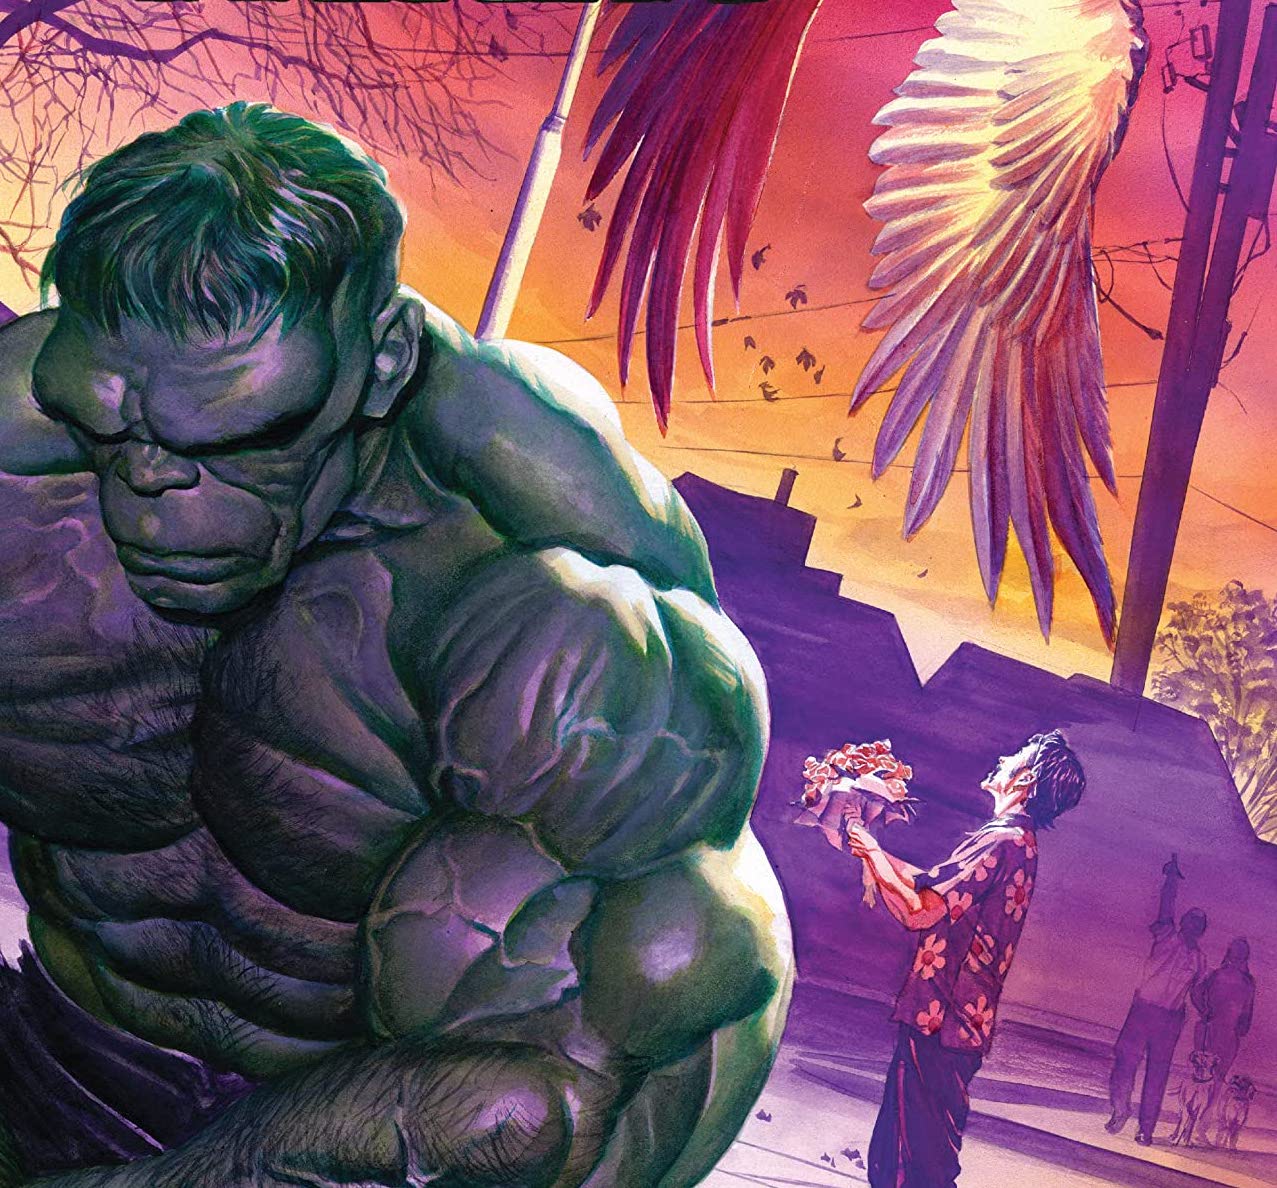 'Immortal Hulk' #48 is the calm before the horrific storm